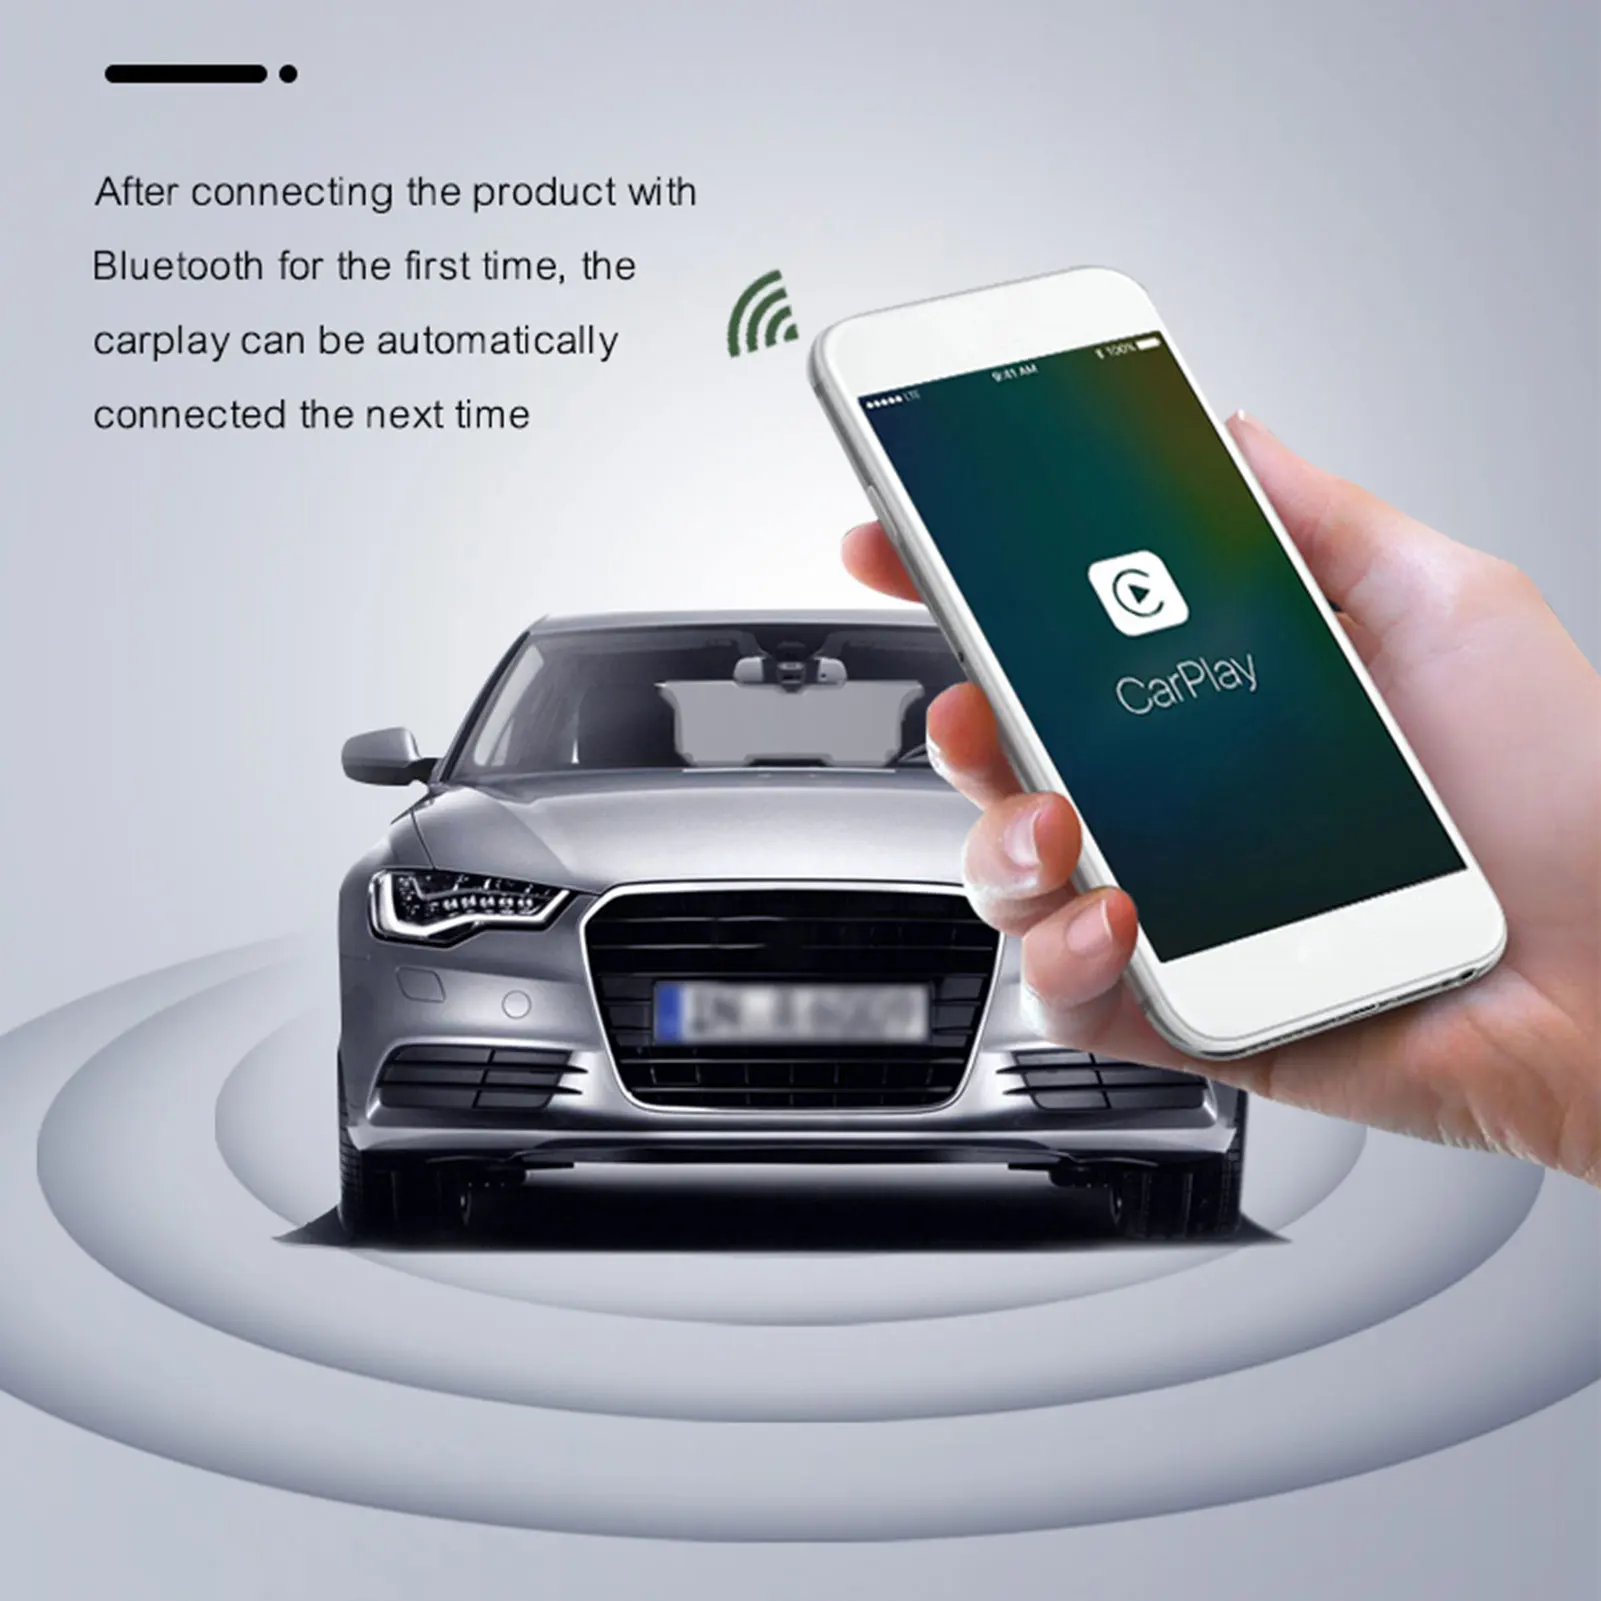 2021 Proaok Convert Wired to Wireless CarPlay Support Online Update Wireless Carplay Adapter New Version Activator Dongle for i Phone with Factory Wired CarPlay for 2019-2021 Cars Model 